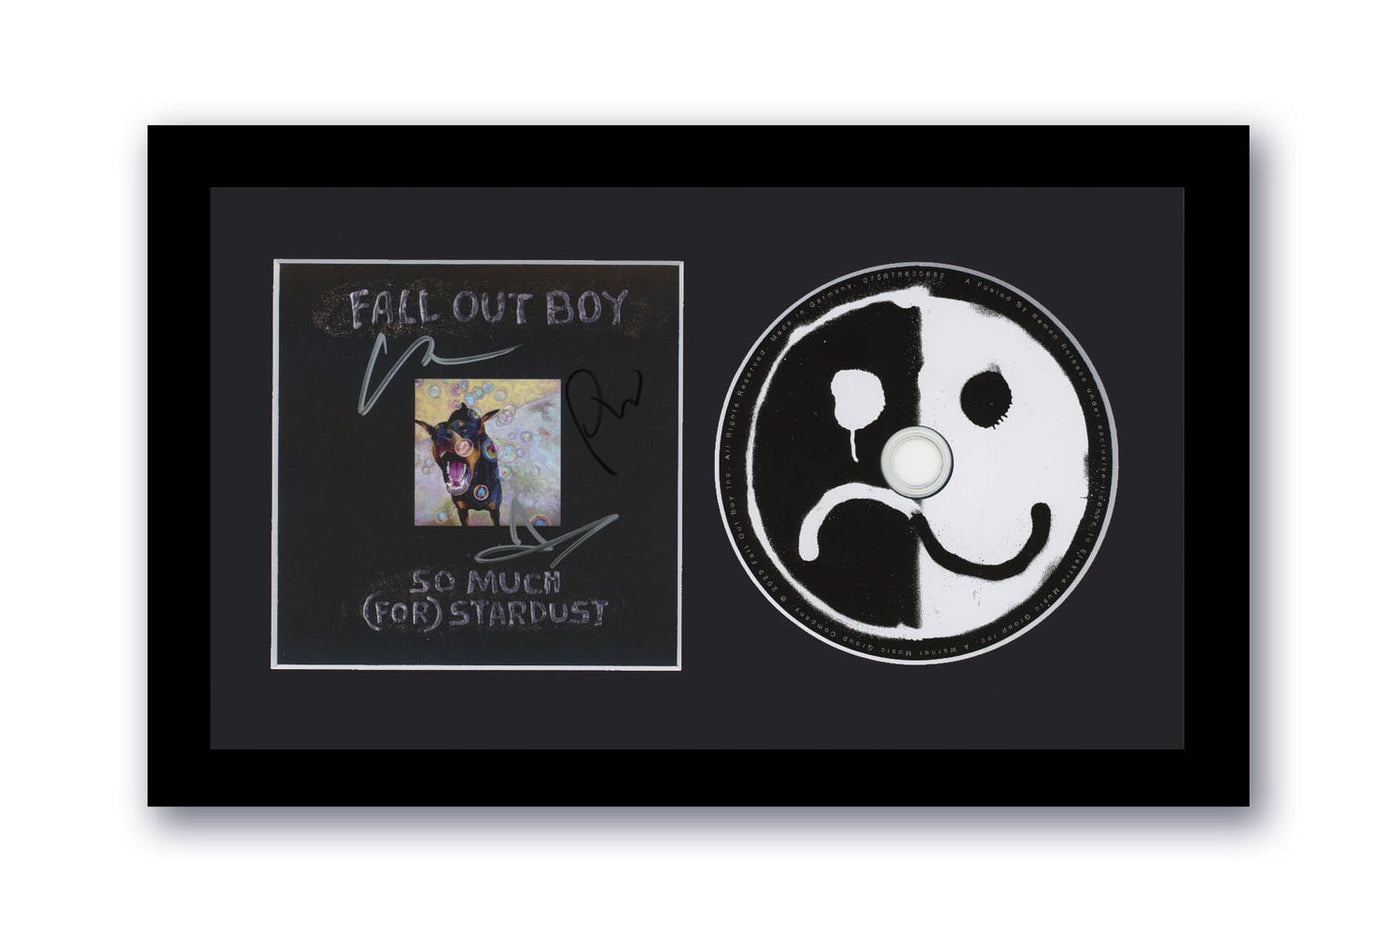 Fall Out Boy Autographed Signed 7x12 Framed CD So Much For Stardust ACOA #2